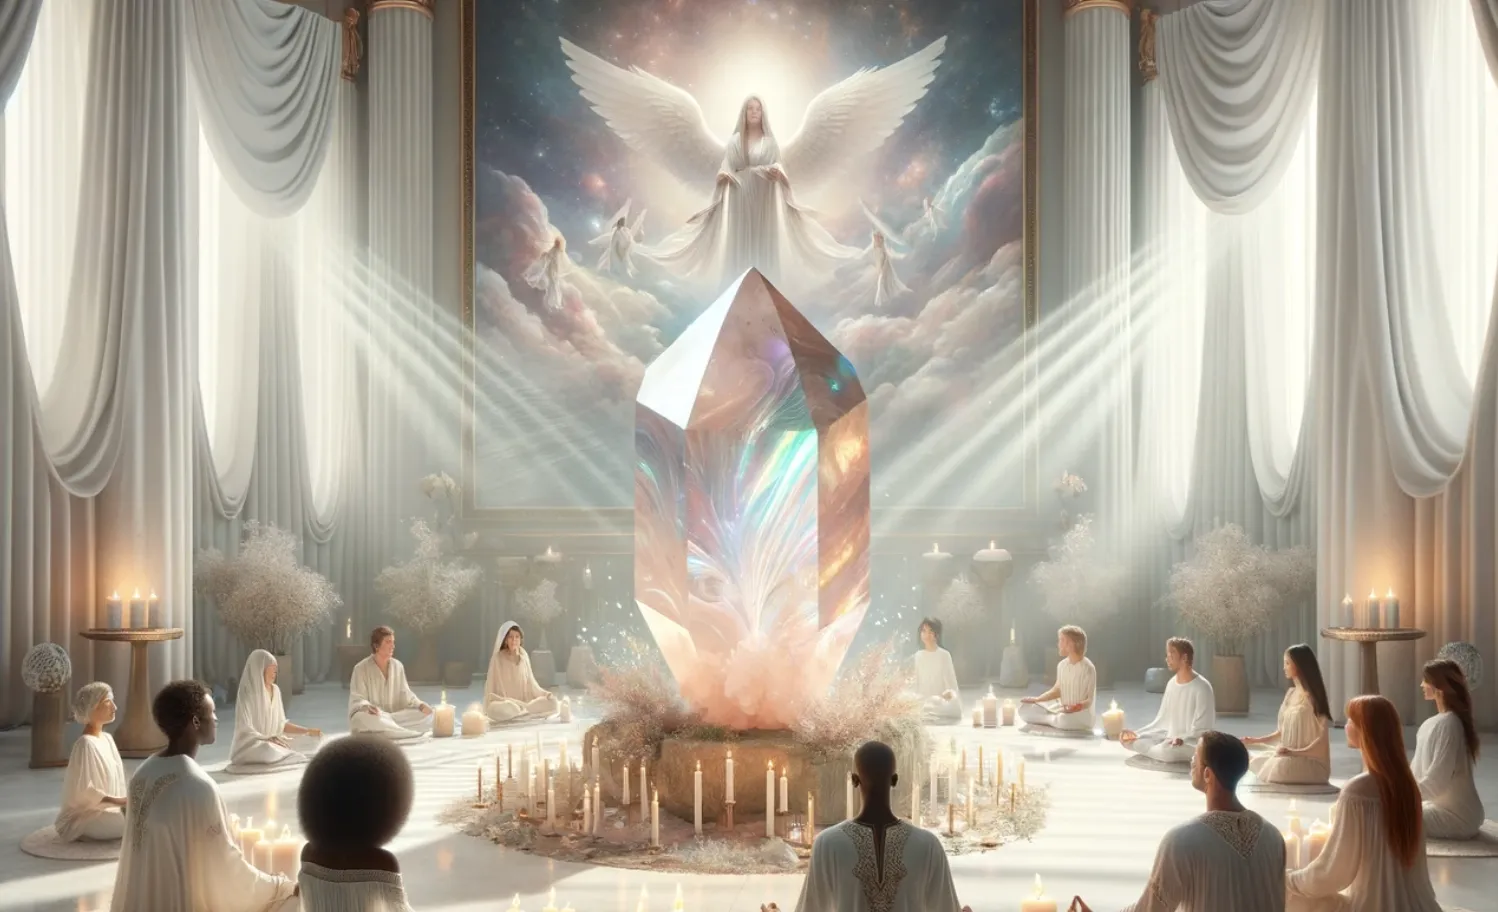 large rose quartz crystal in a white church with an angel painting and people meditating